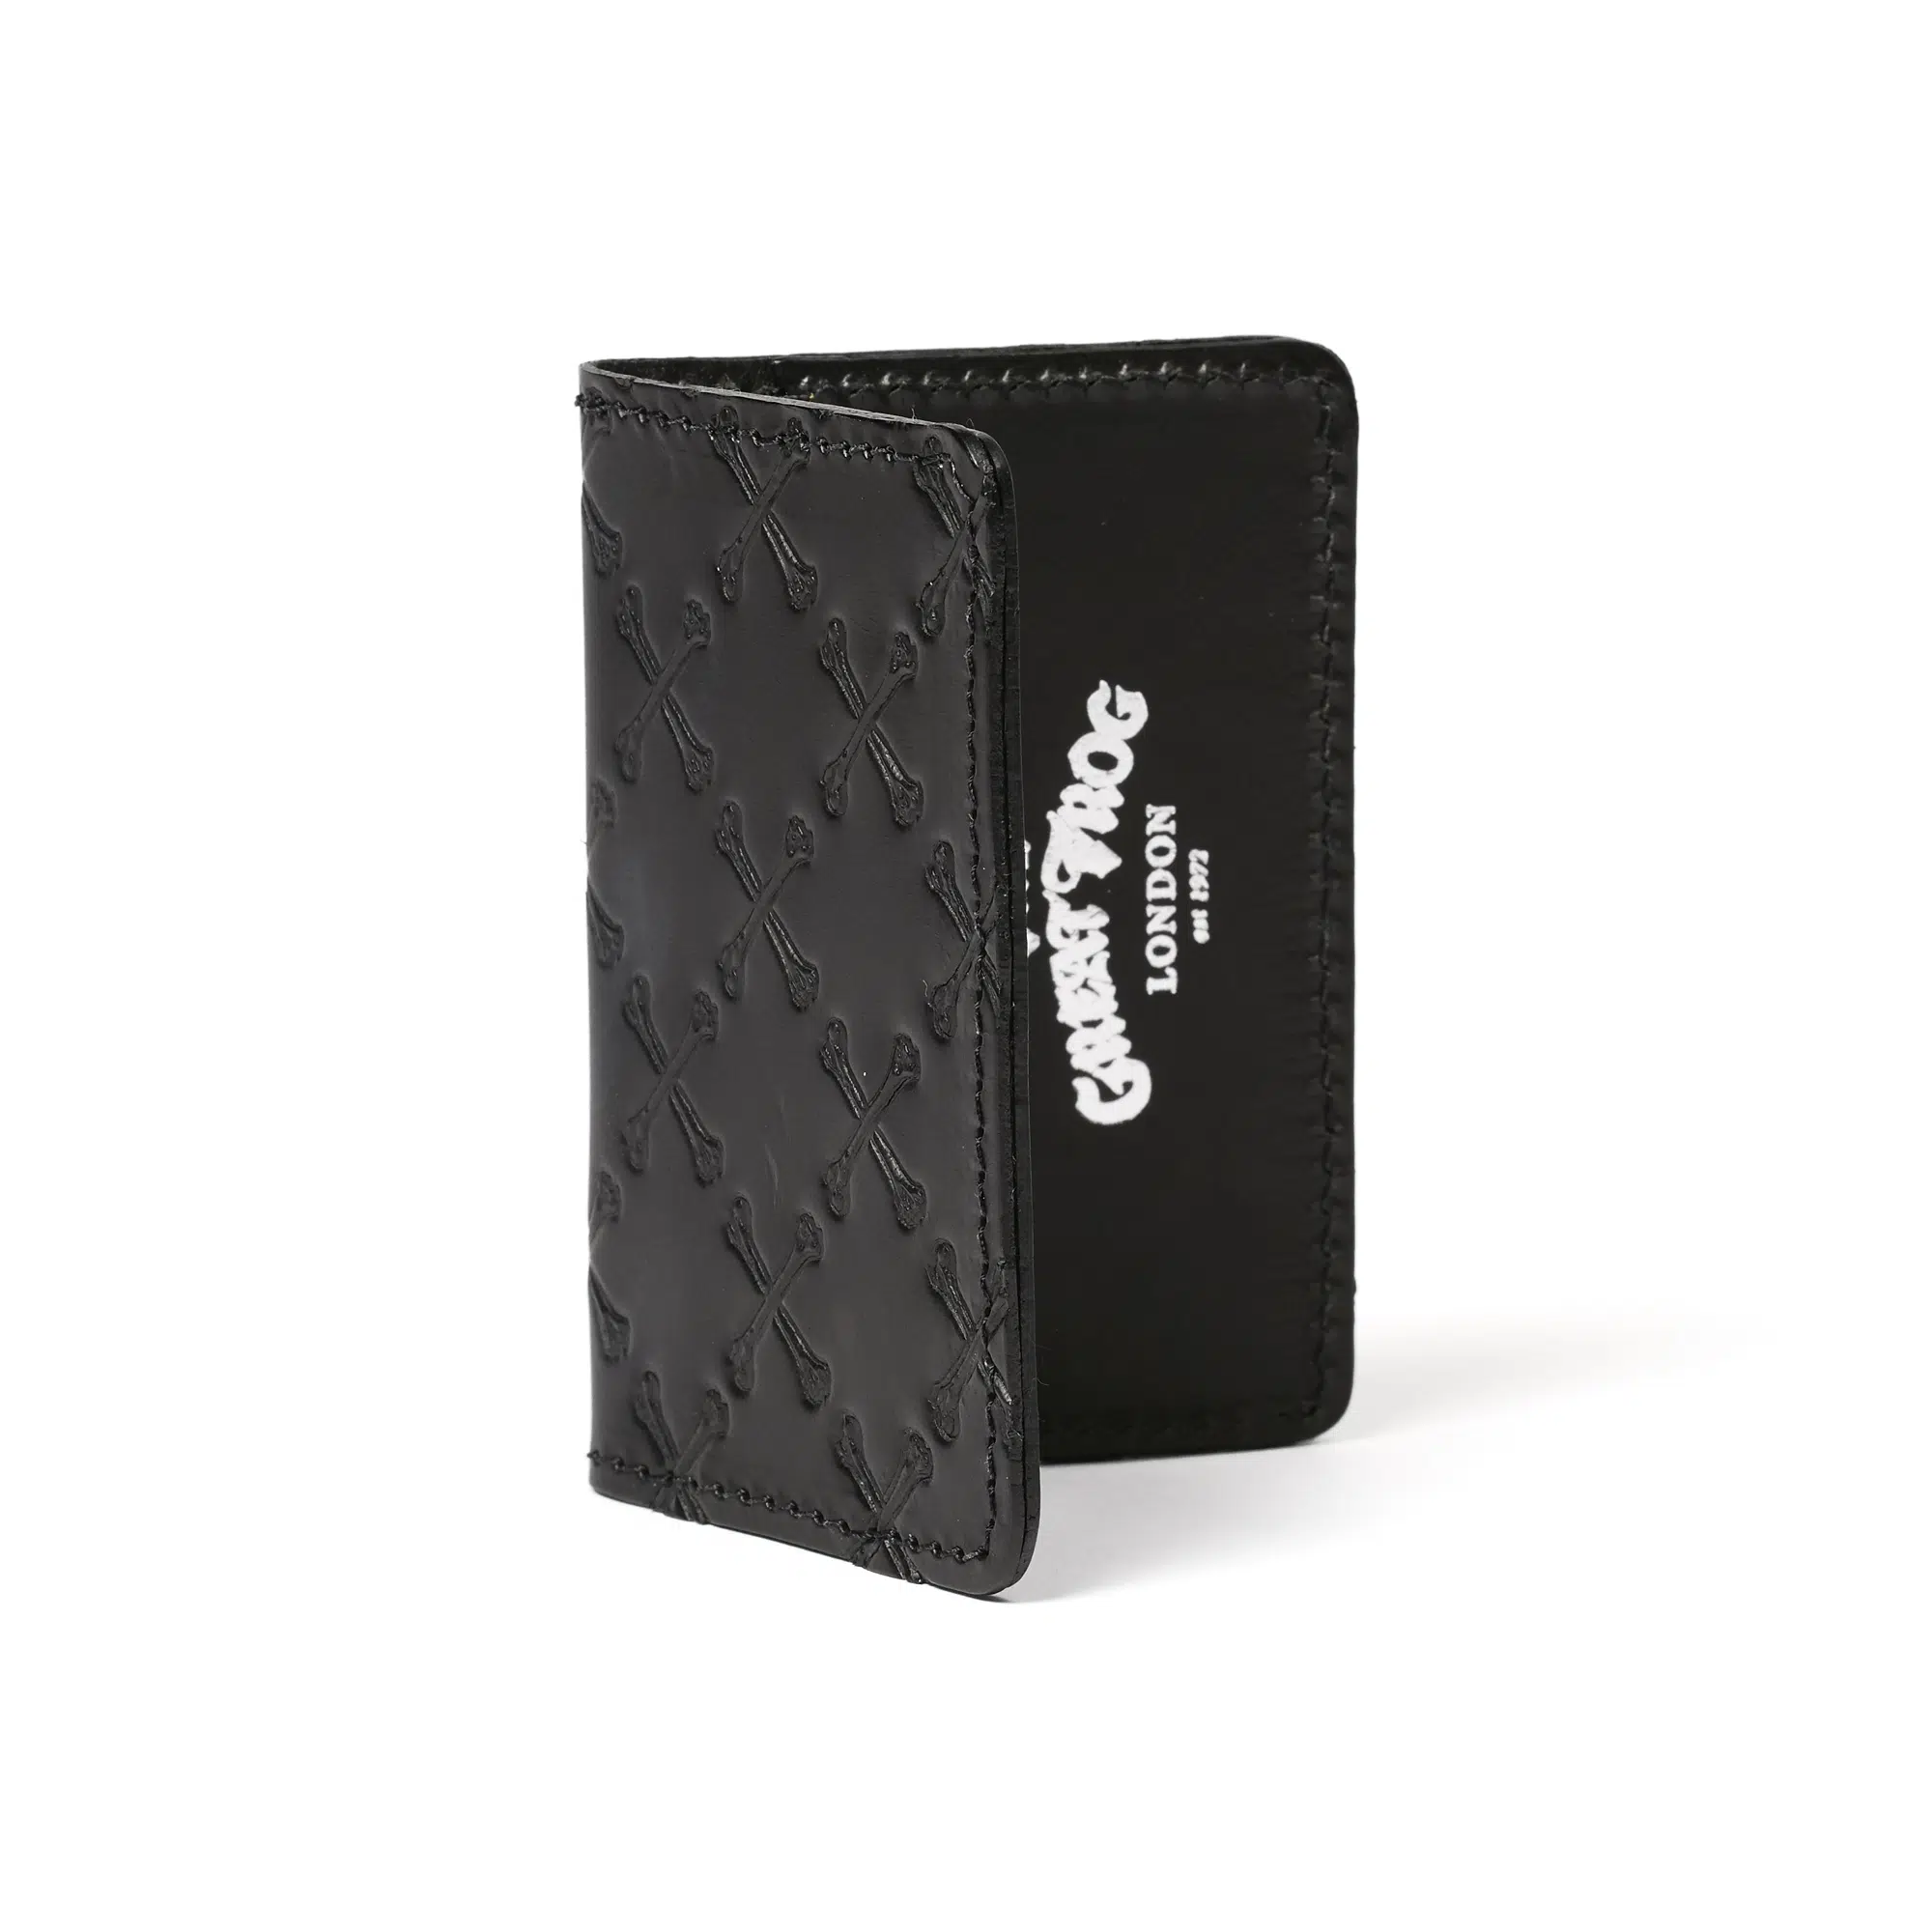 Leather Monogram Card Holder - The Great Frog London - USA